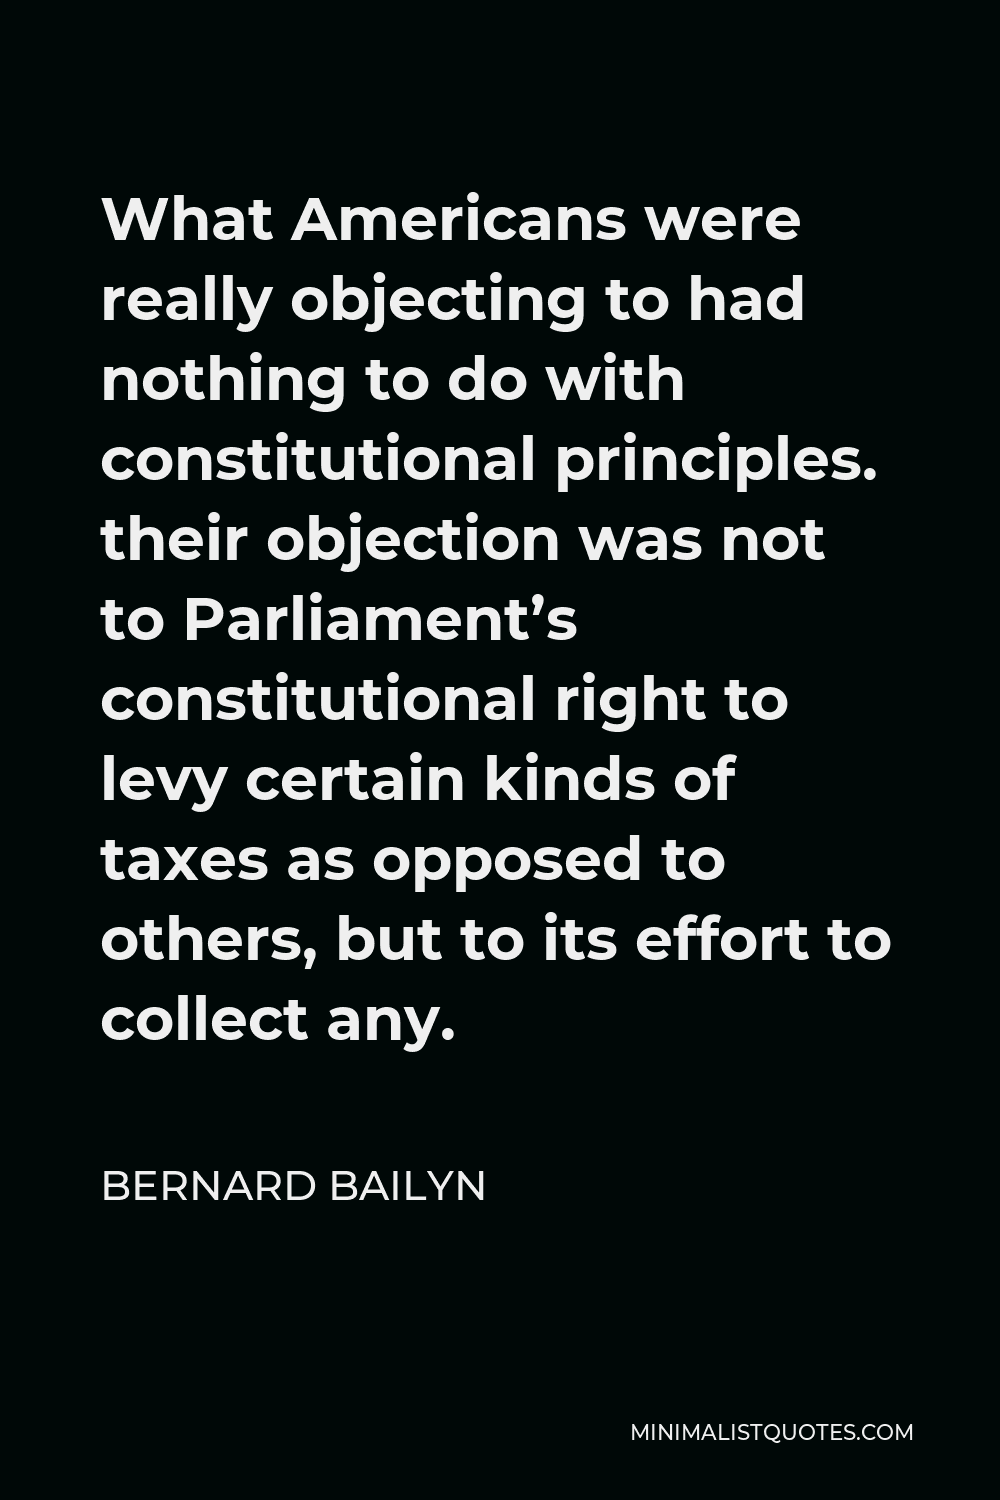 Bernard Bailyn Quote - What Americans were really objecting to had nothing to do with constitutional principles. their objection was not to Parliament’s constitutional right to levy certain kinds of taxes as opposed to others, but to its effort to collect any.